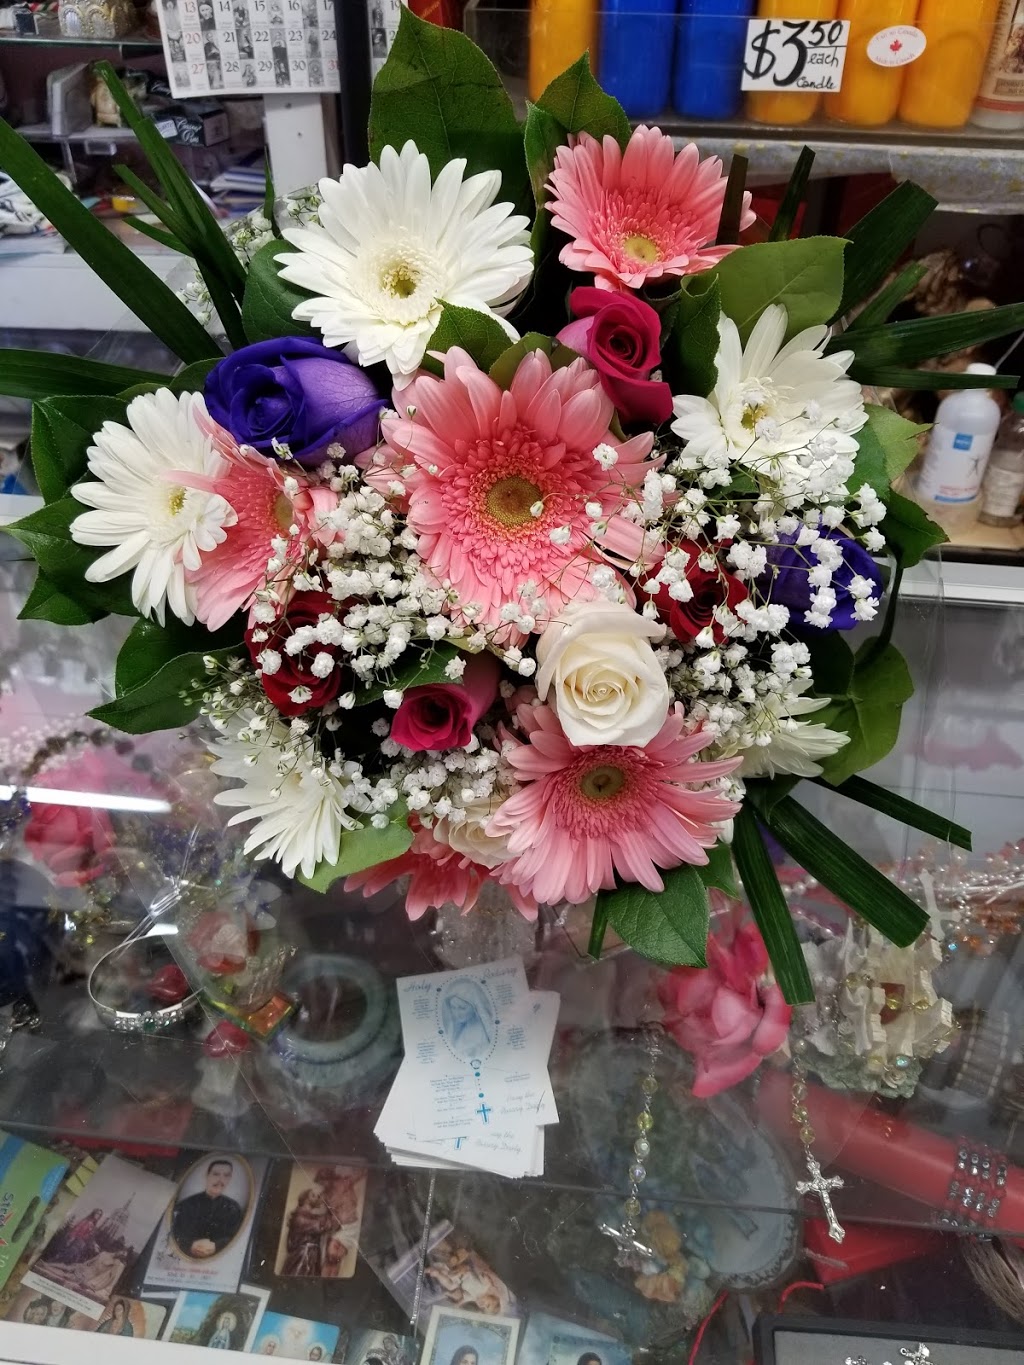 Toms Flower & Gift | 1863 Eglinton Ave W, York, ON M6E 3X2, Canada | Phone: (416) 939-9279